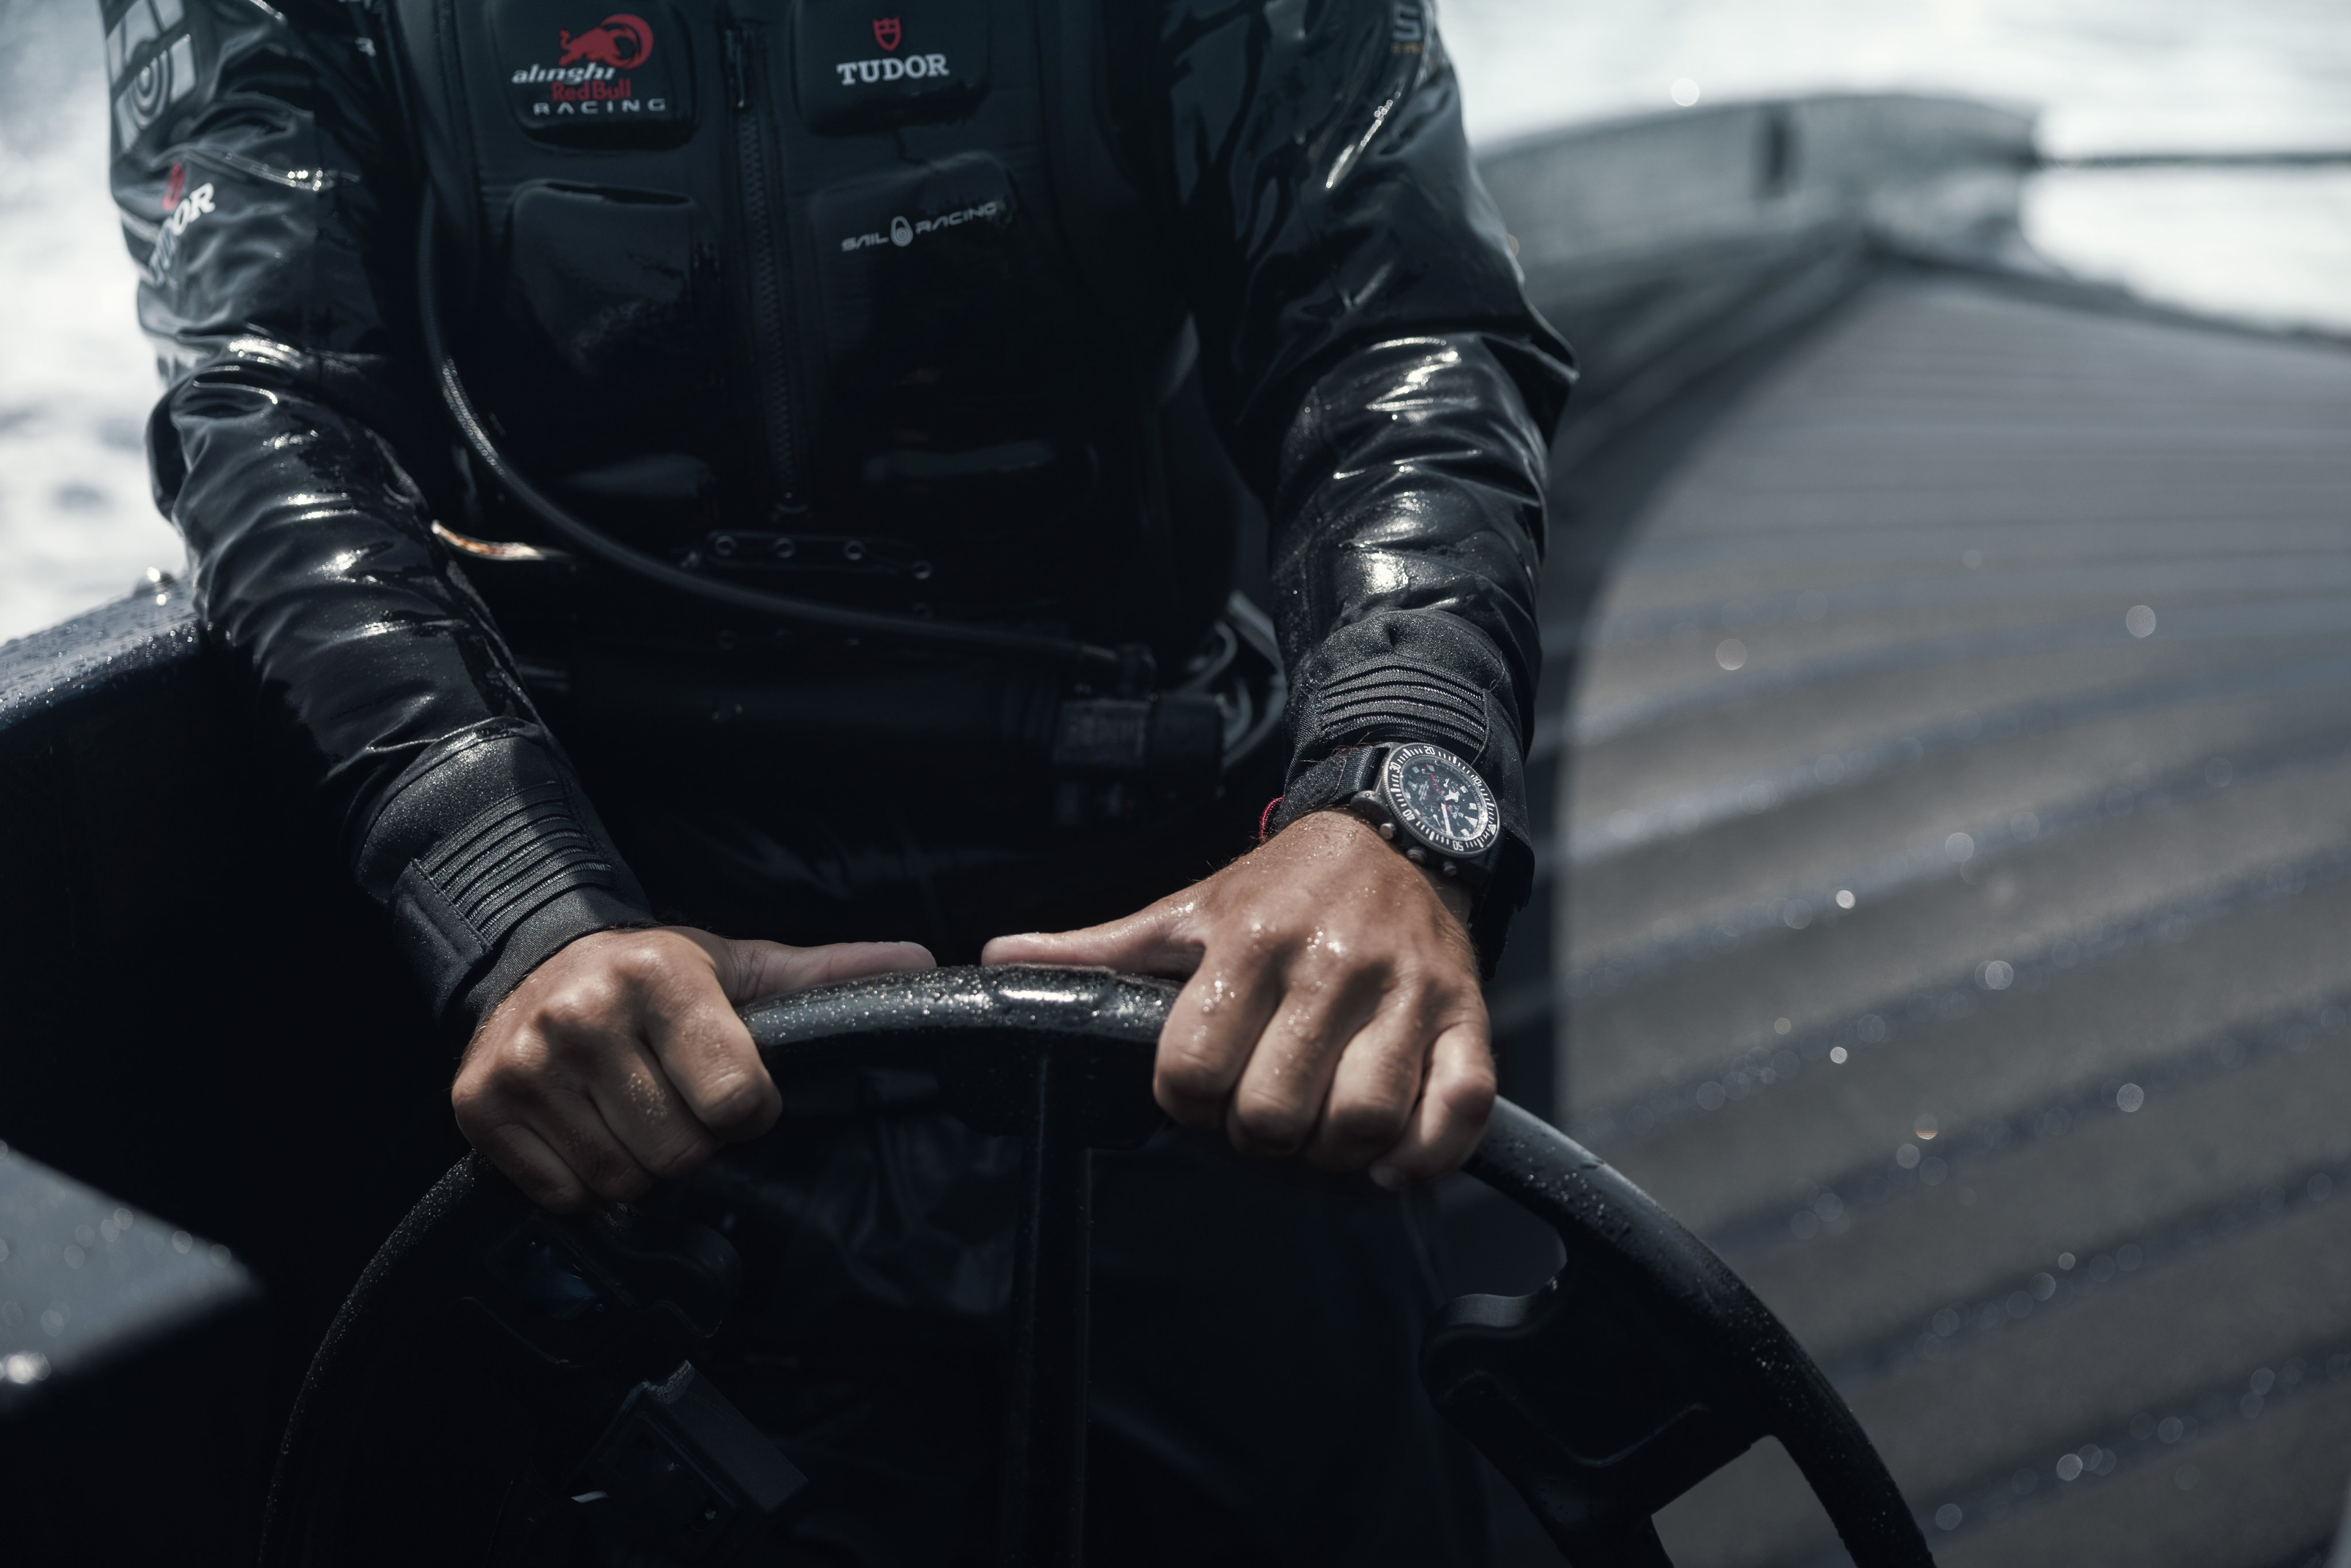 Louis Vuitton returns to the America's Cup for 2024 - The Glass Magazine